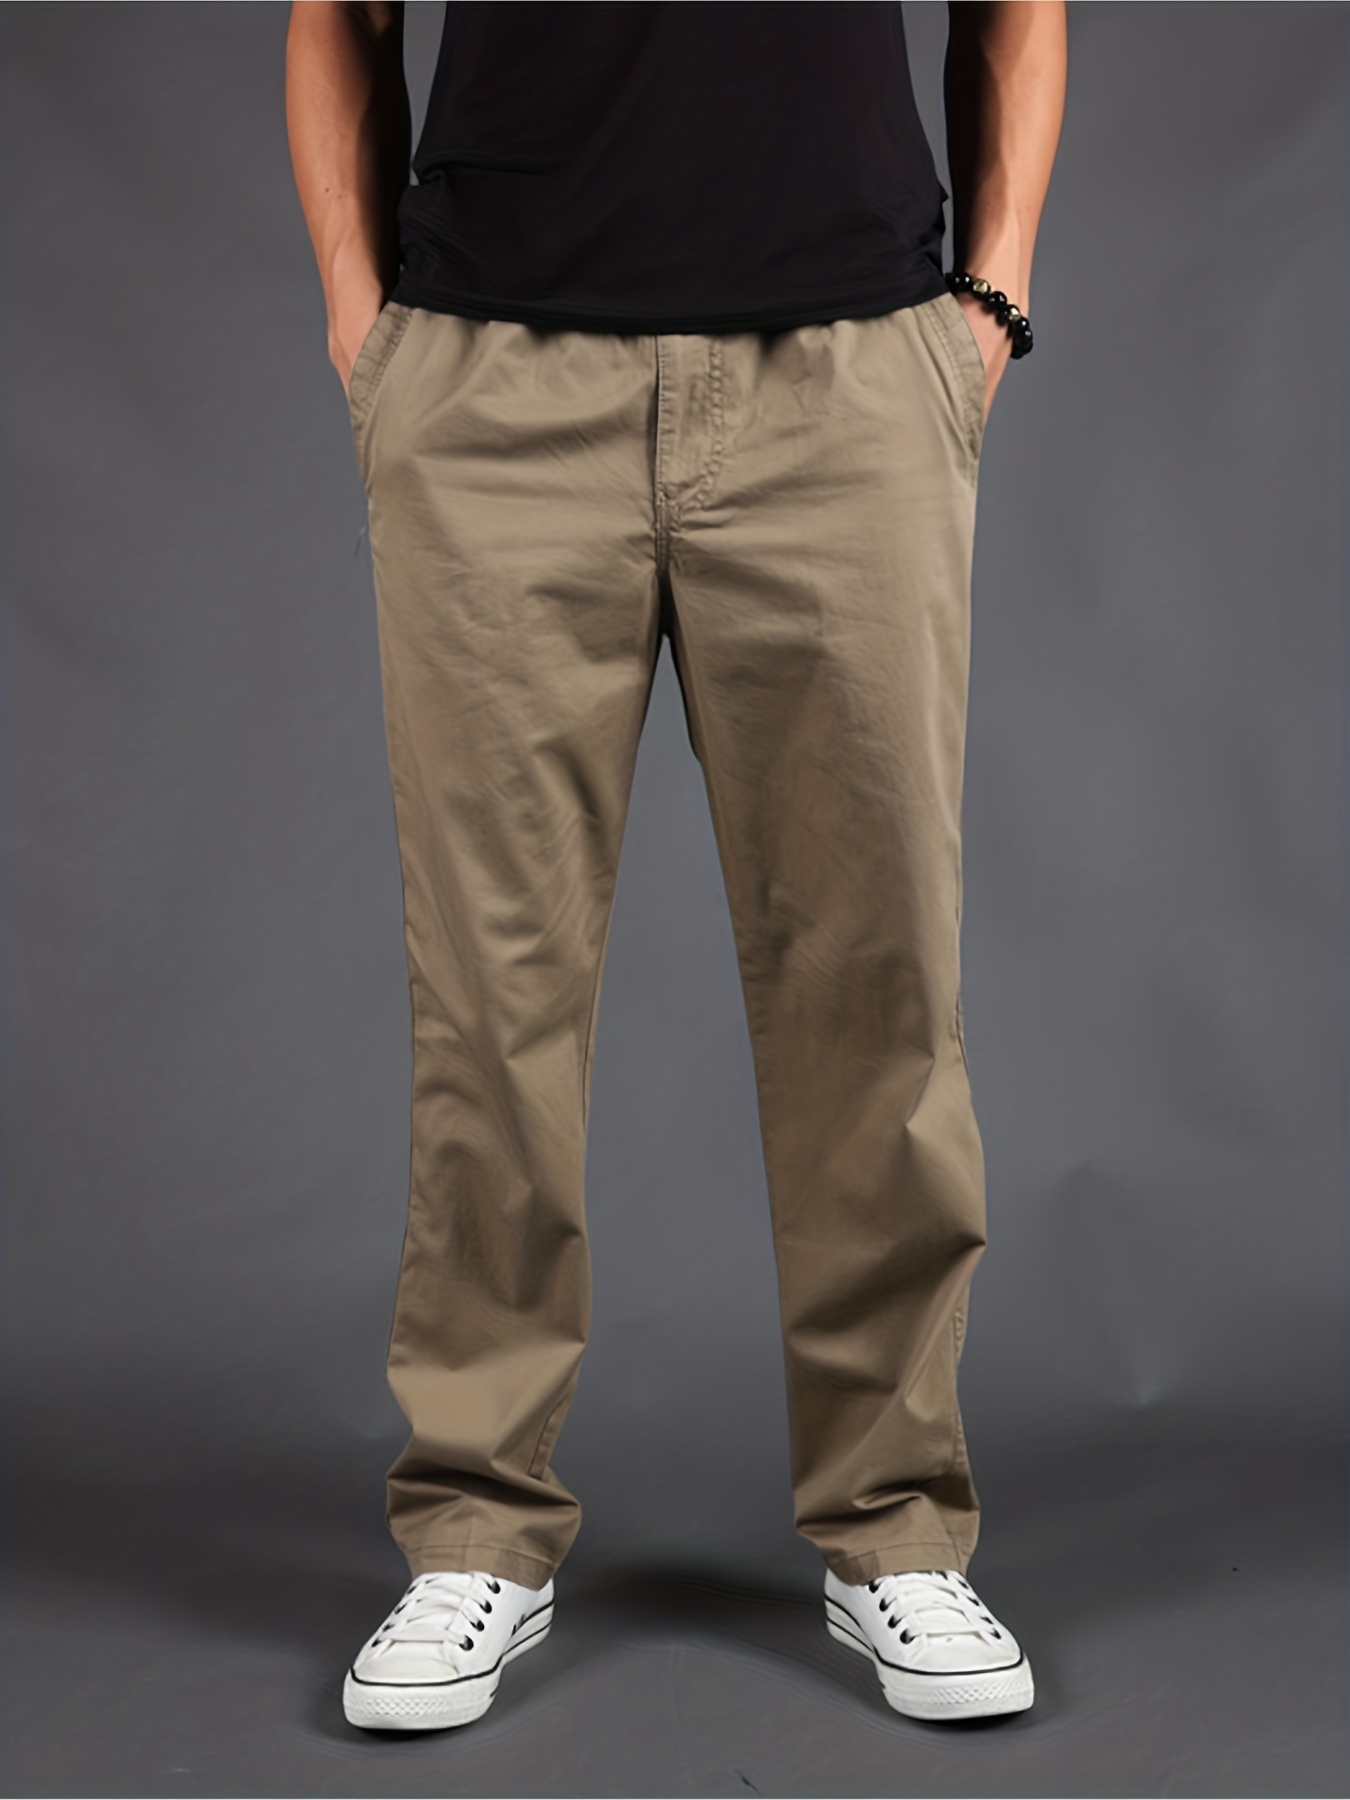 Men's trouser | Chinos & jeans Styles |Slim Fit – JDC Store Online Shopping